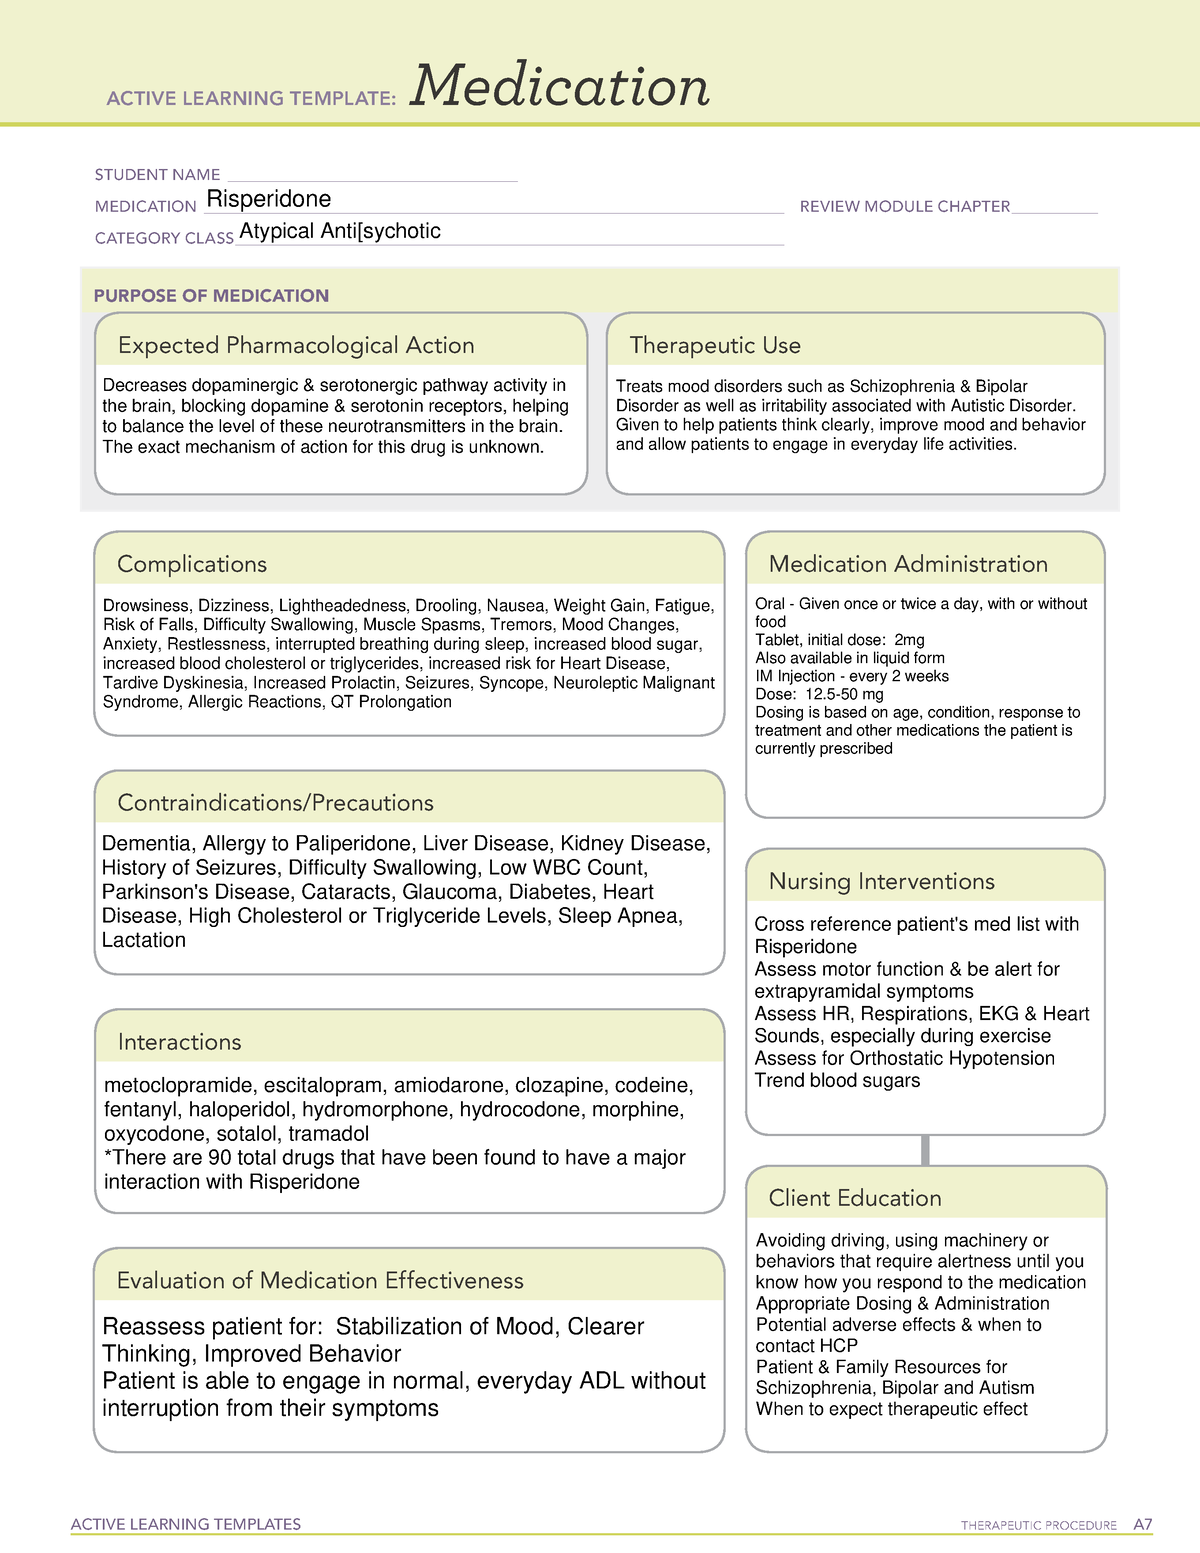 ati-resperidone-template-active-learning-templates-therapeutic-procedure-a-medication